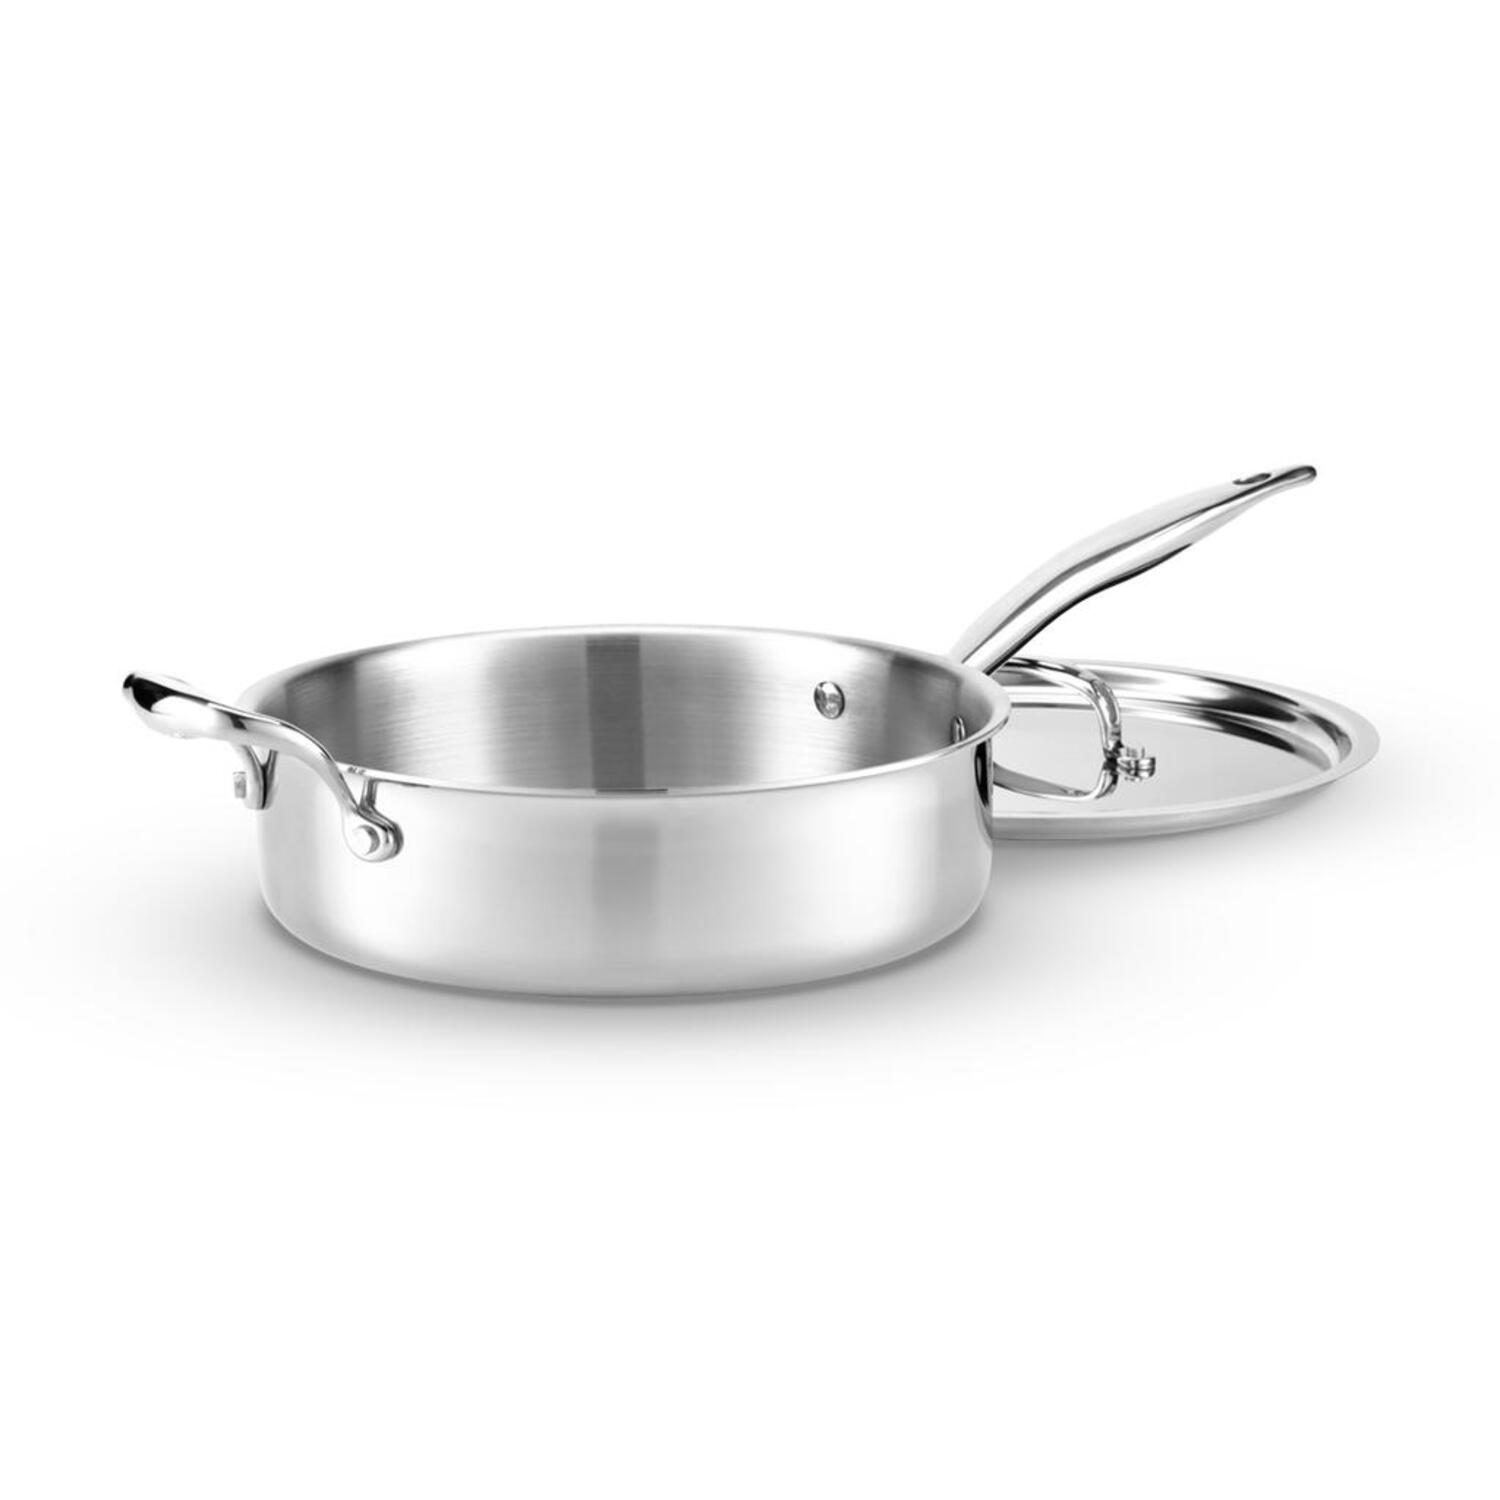 All-Clad Stainless Steel 4-Quart Saute Pan with Lid - The WiC